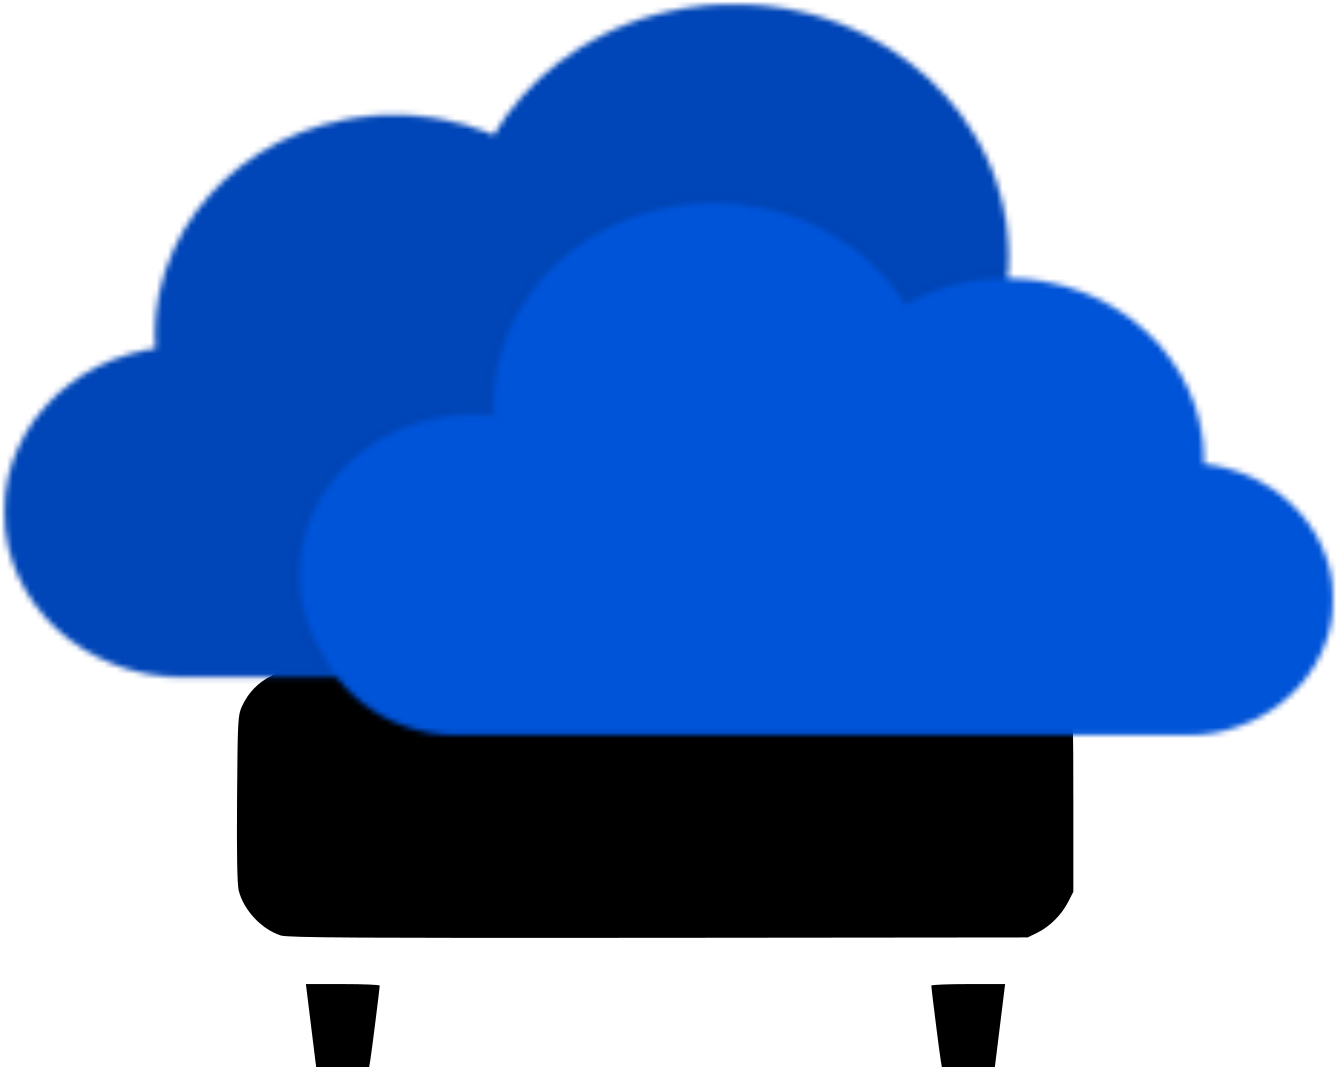 Download Onedrive Logo Png PNG Image with No Background - PNGkey.com